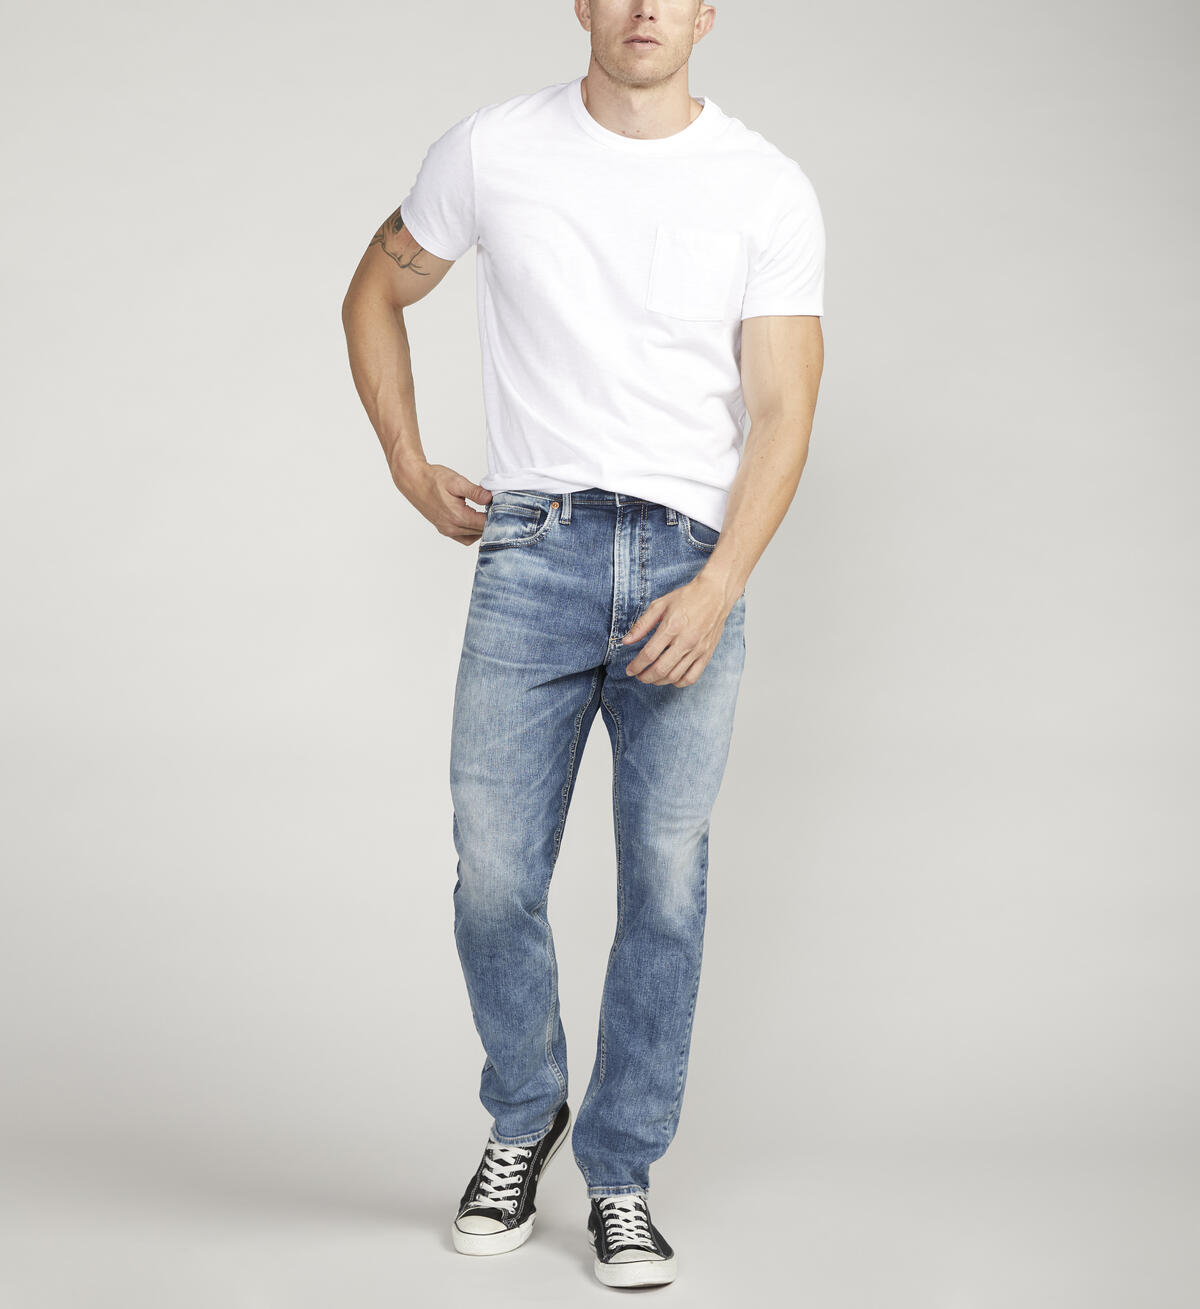 Risto Athletic Fit Skinny Jeans, , hi-res image number 0